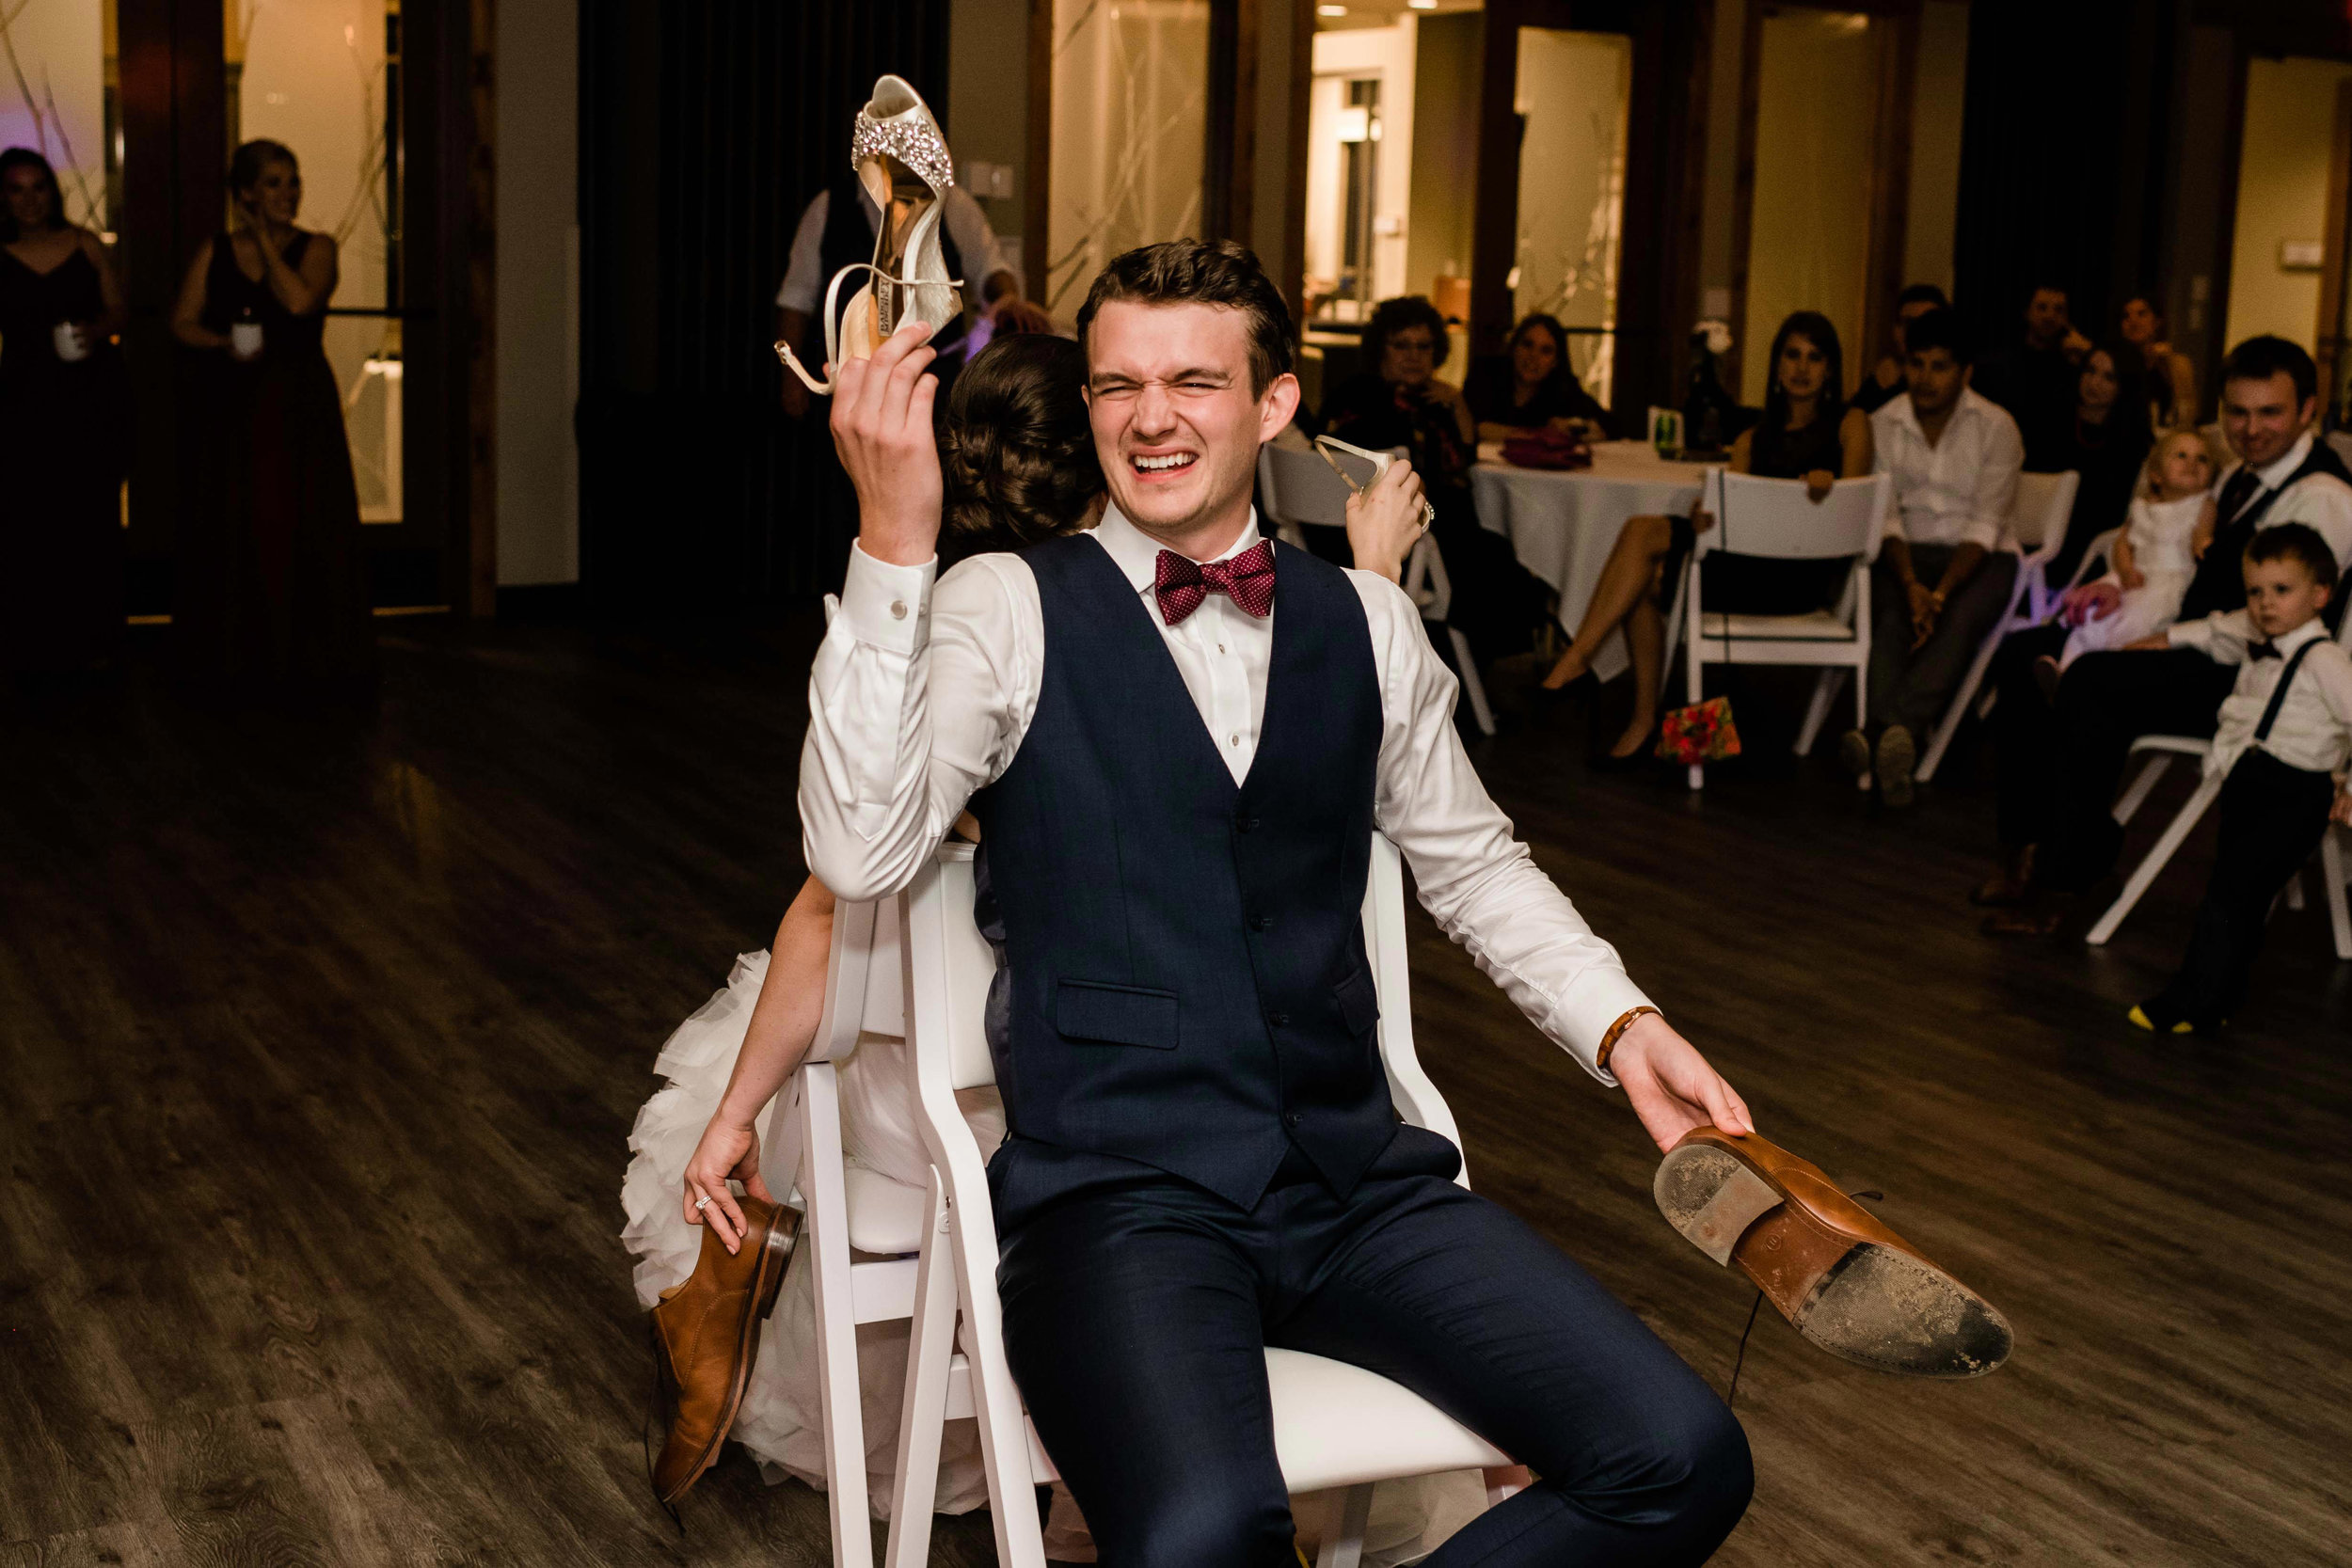 Groom playing the shoe game with bride